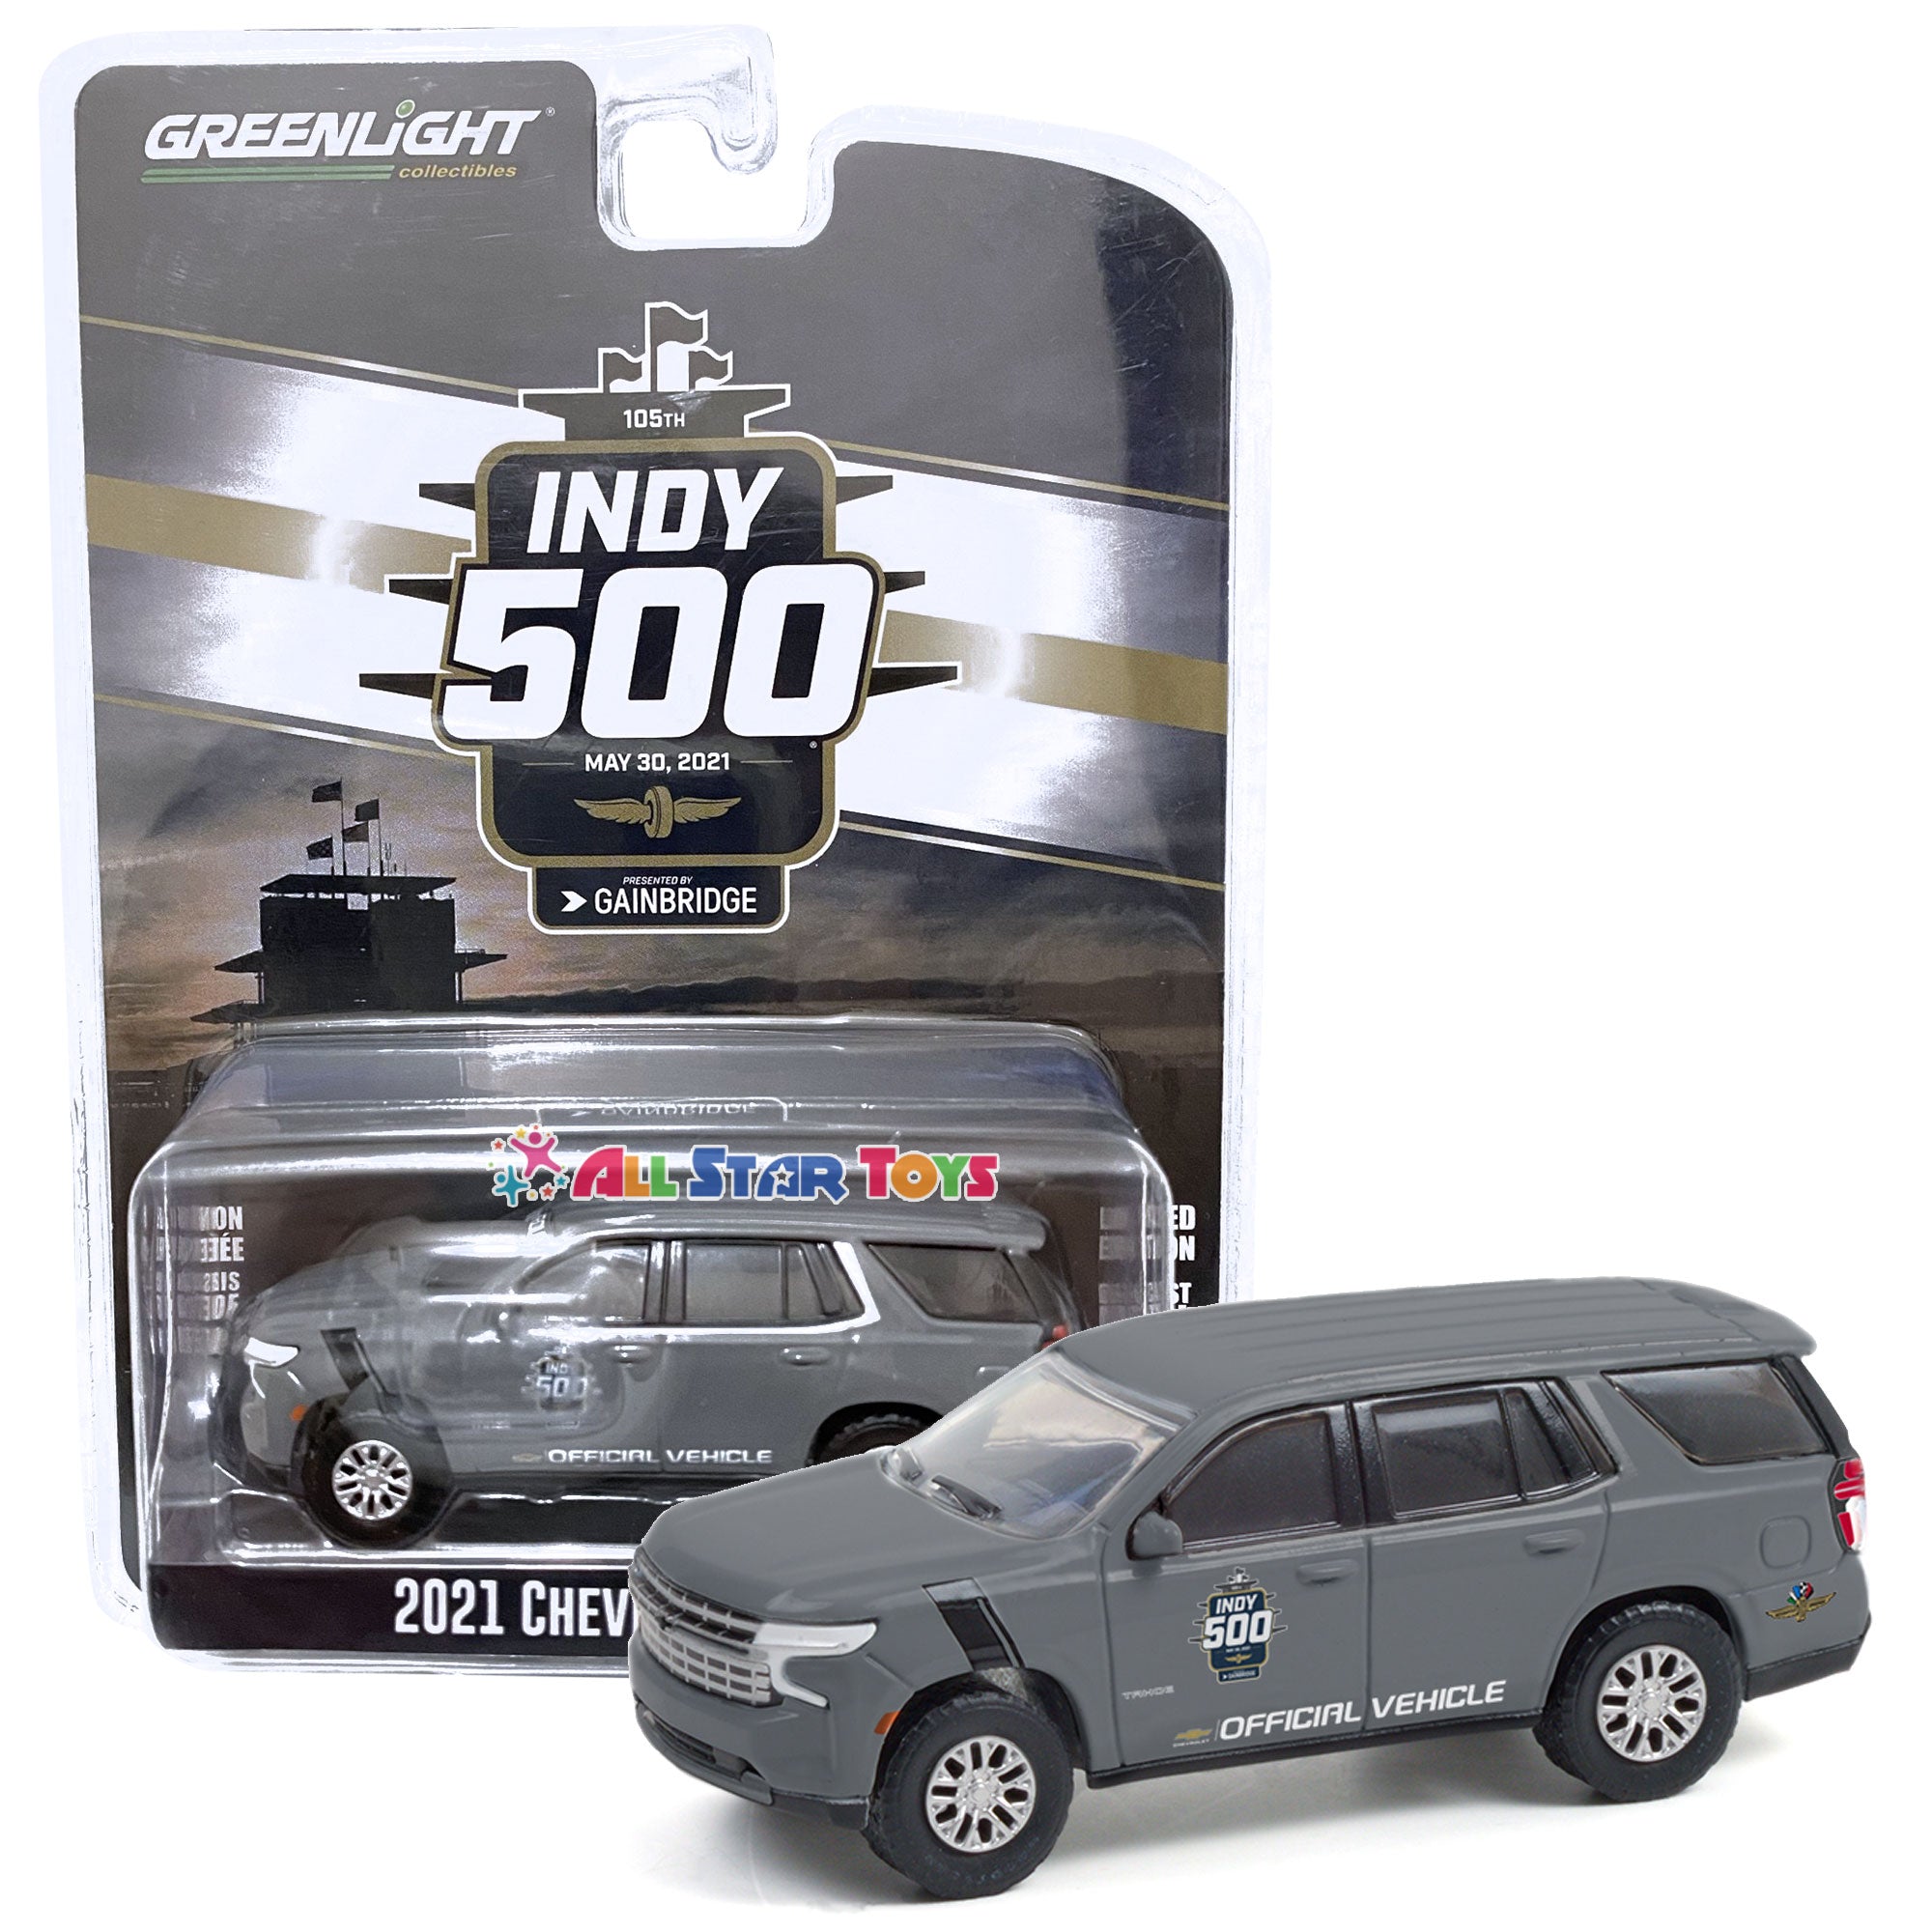 Greenlight 1:64 Scale 2021 Chevrolet Tahoe Indy 500 Vehicle Diecast Mo –  All Star Toys